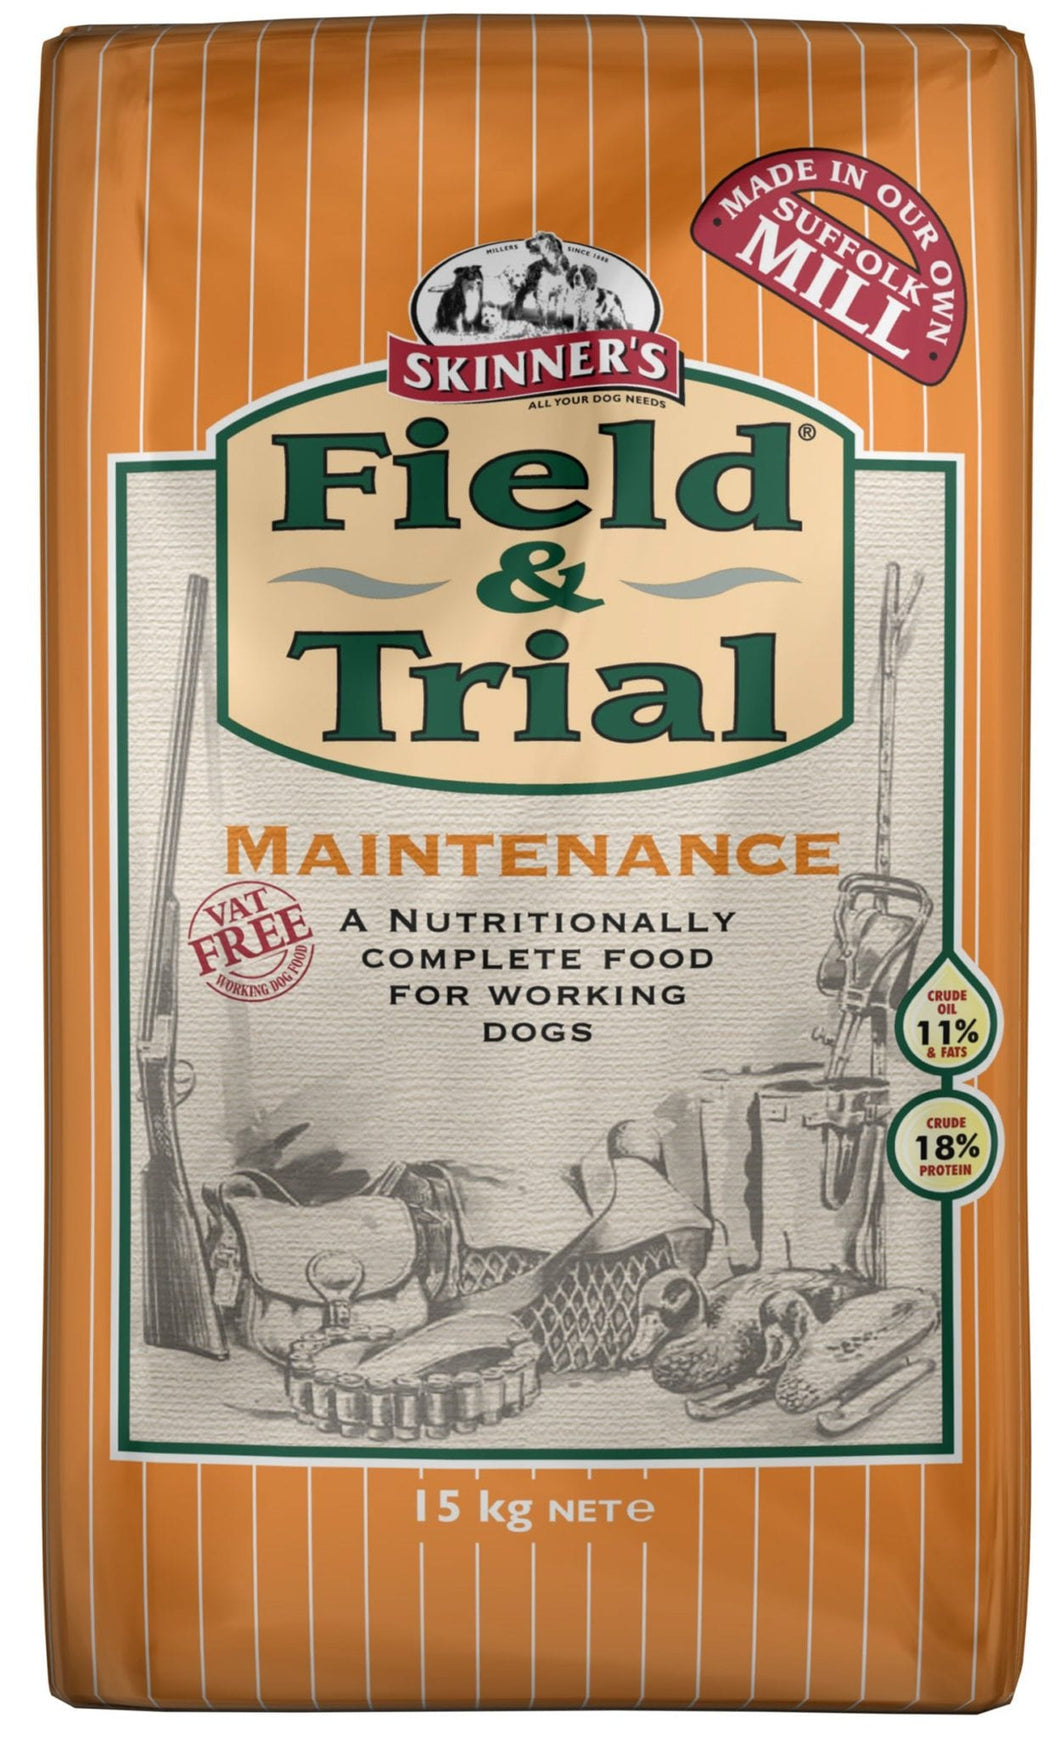 Skinners - Field and Trial Maintenance